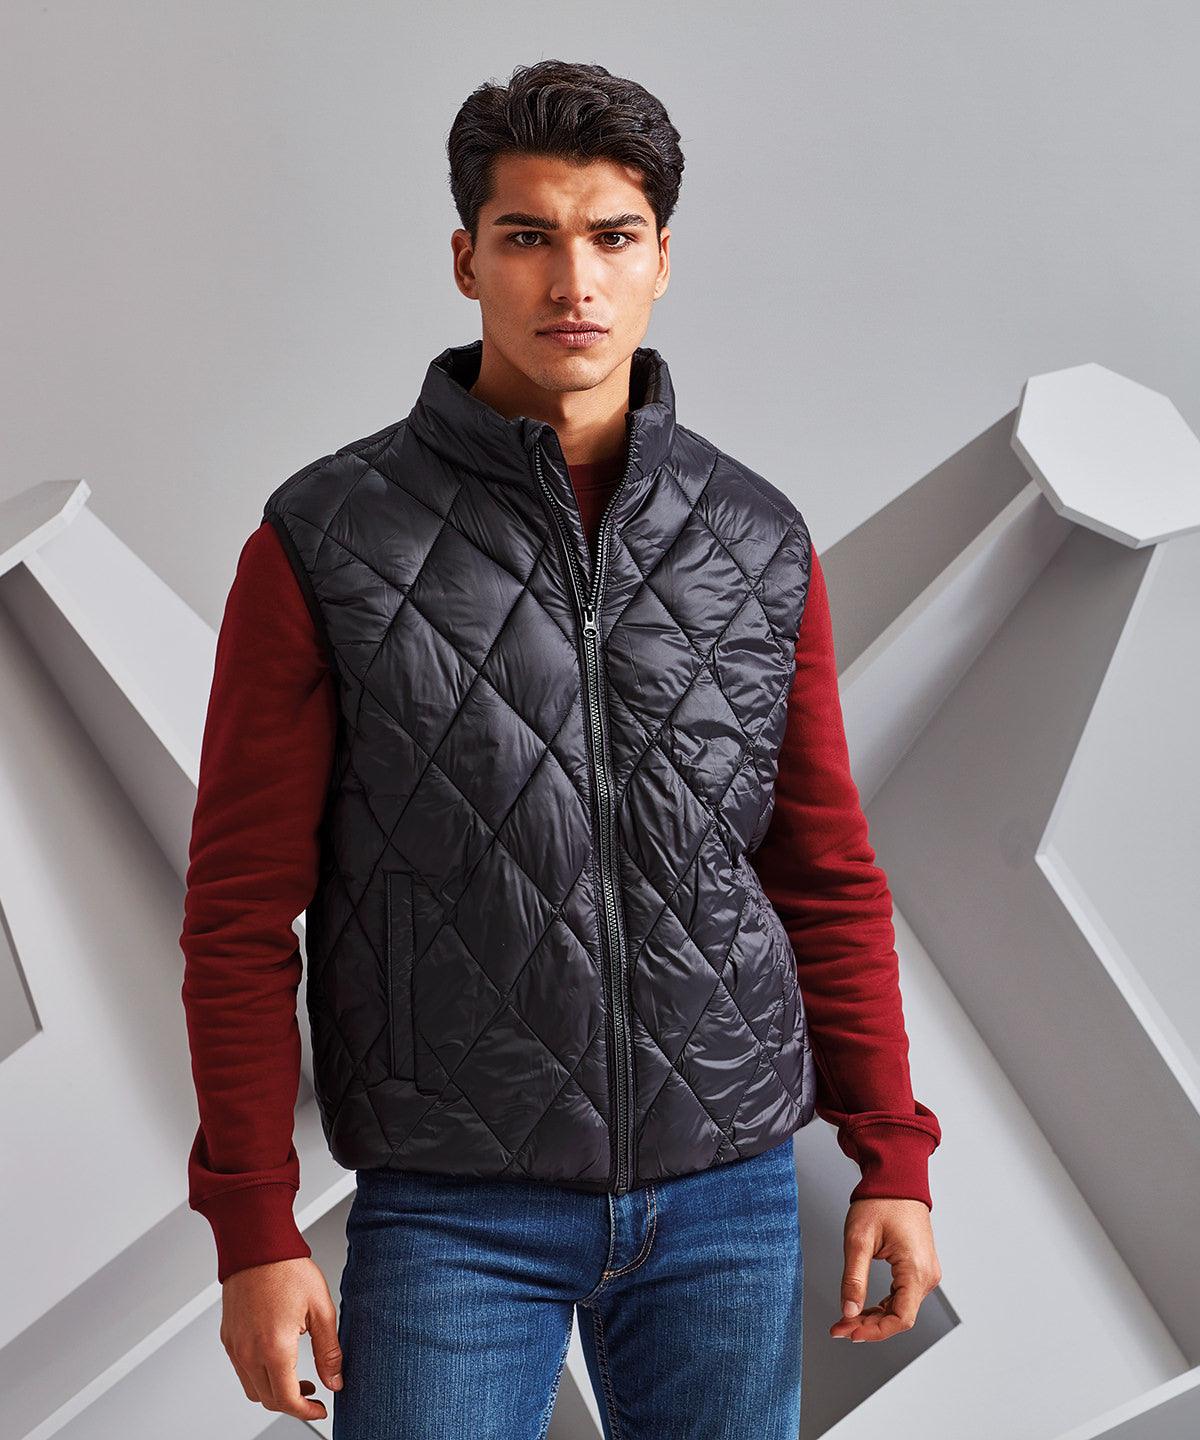 Navy - Diamond pane padded gilet Body Warmers 2786 Alfresco Dining, Directory, Gilets and Bodywarmers, Jackets & Coats, Outdoor Dining, Padded & Insulation, Plus Sizes, Rebrandable Schoolwear Centres